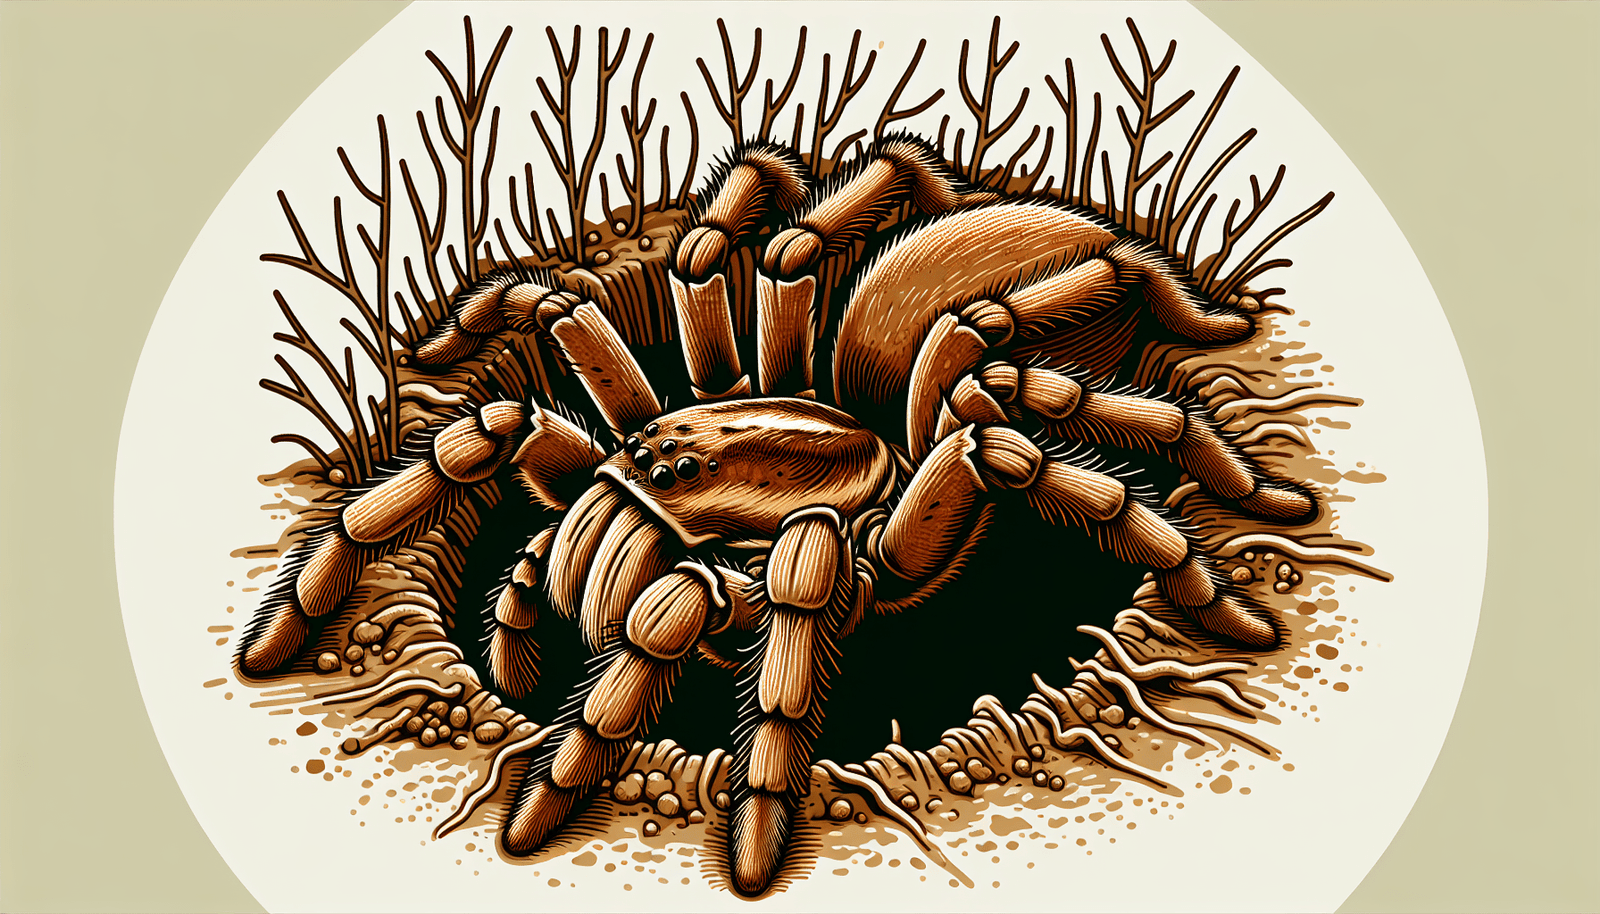 Can You Discuss The Characteristics And Care Requirements Of The Elusive Trapdoor Spider?